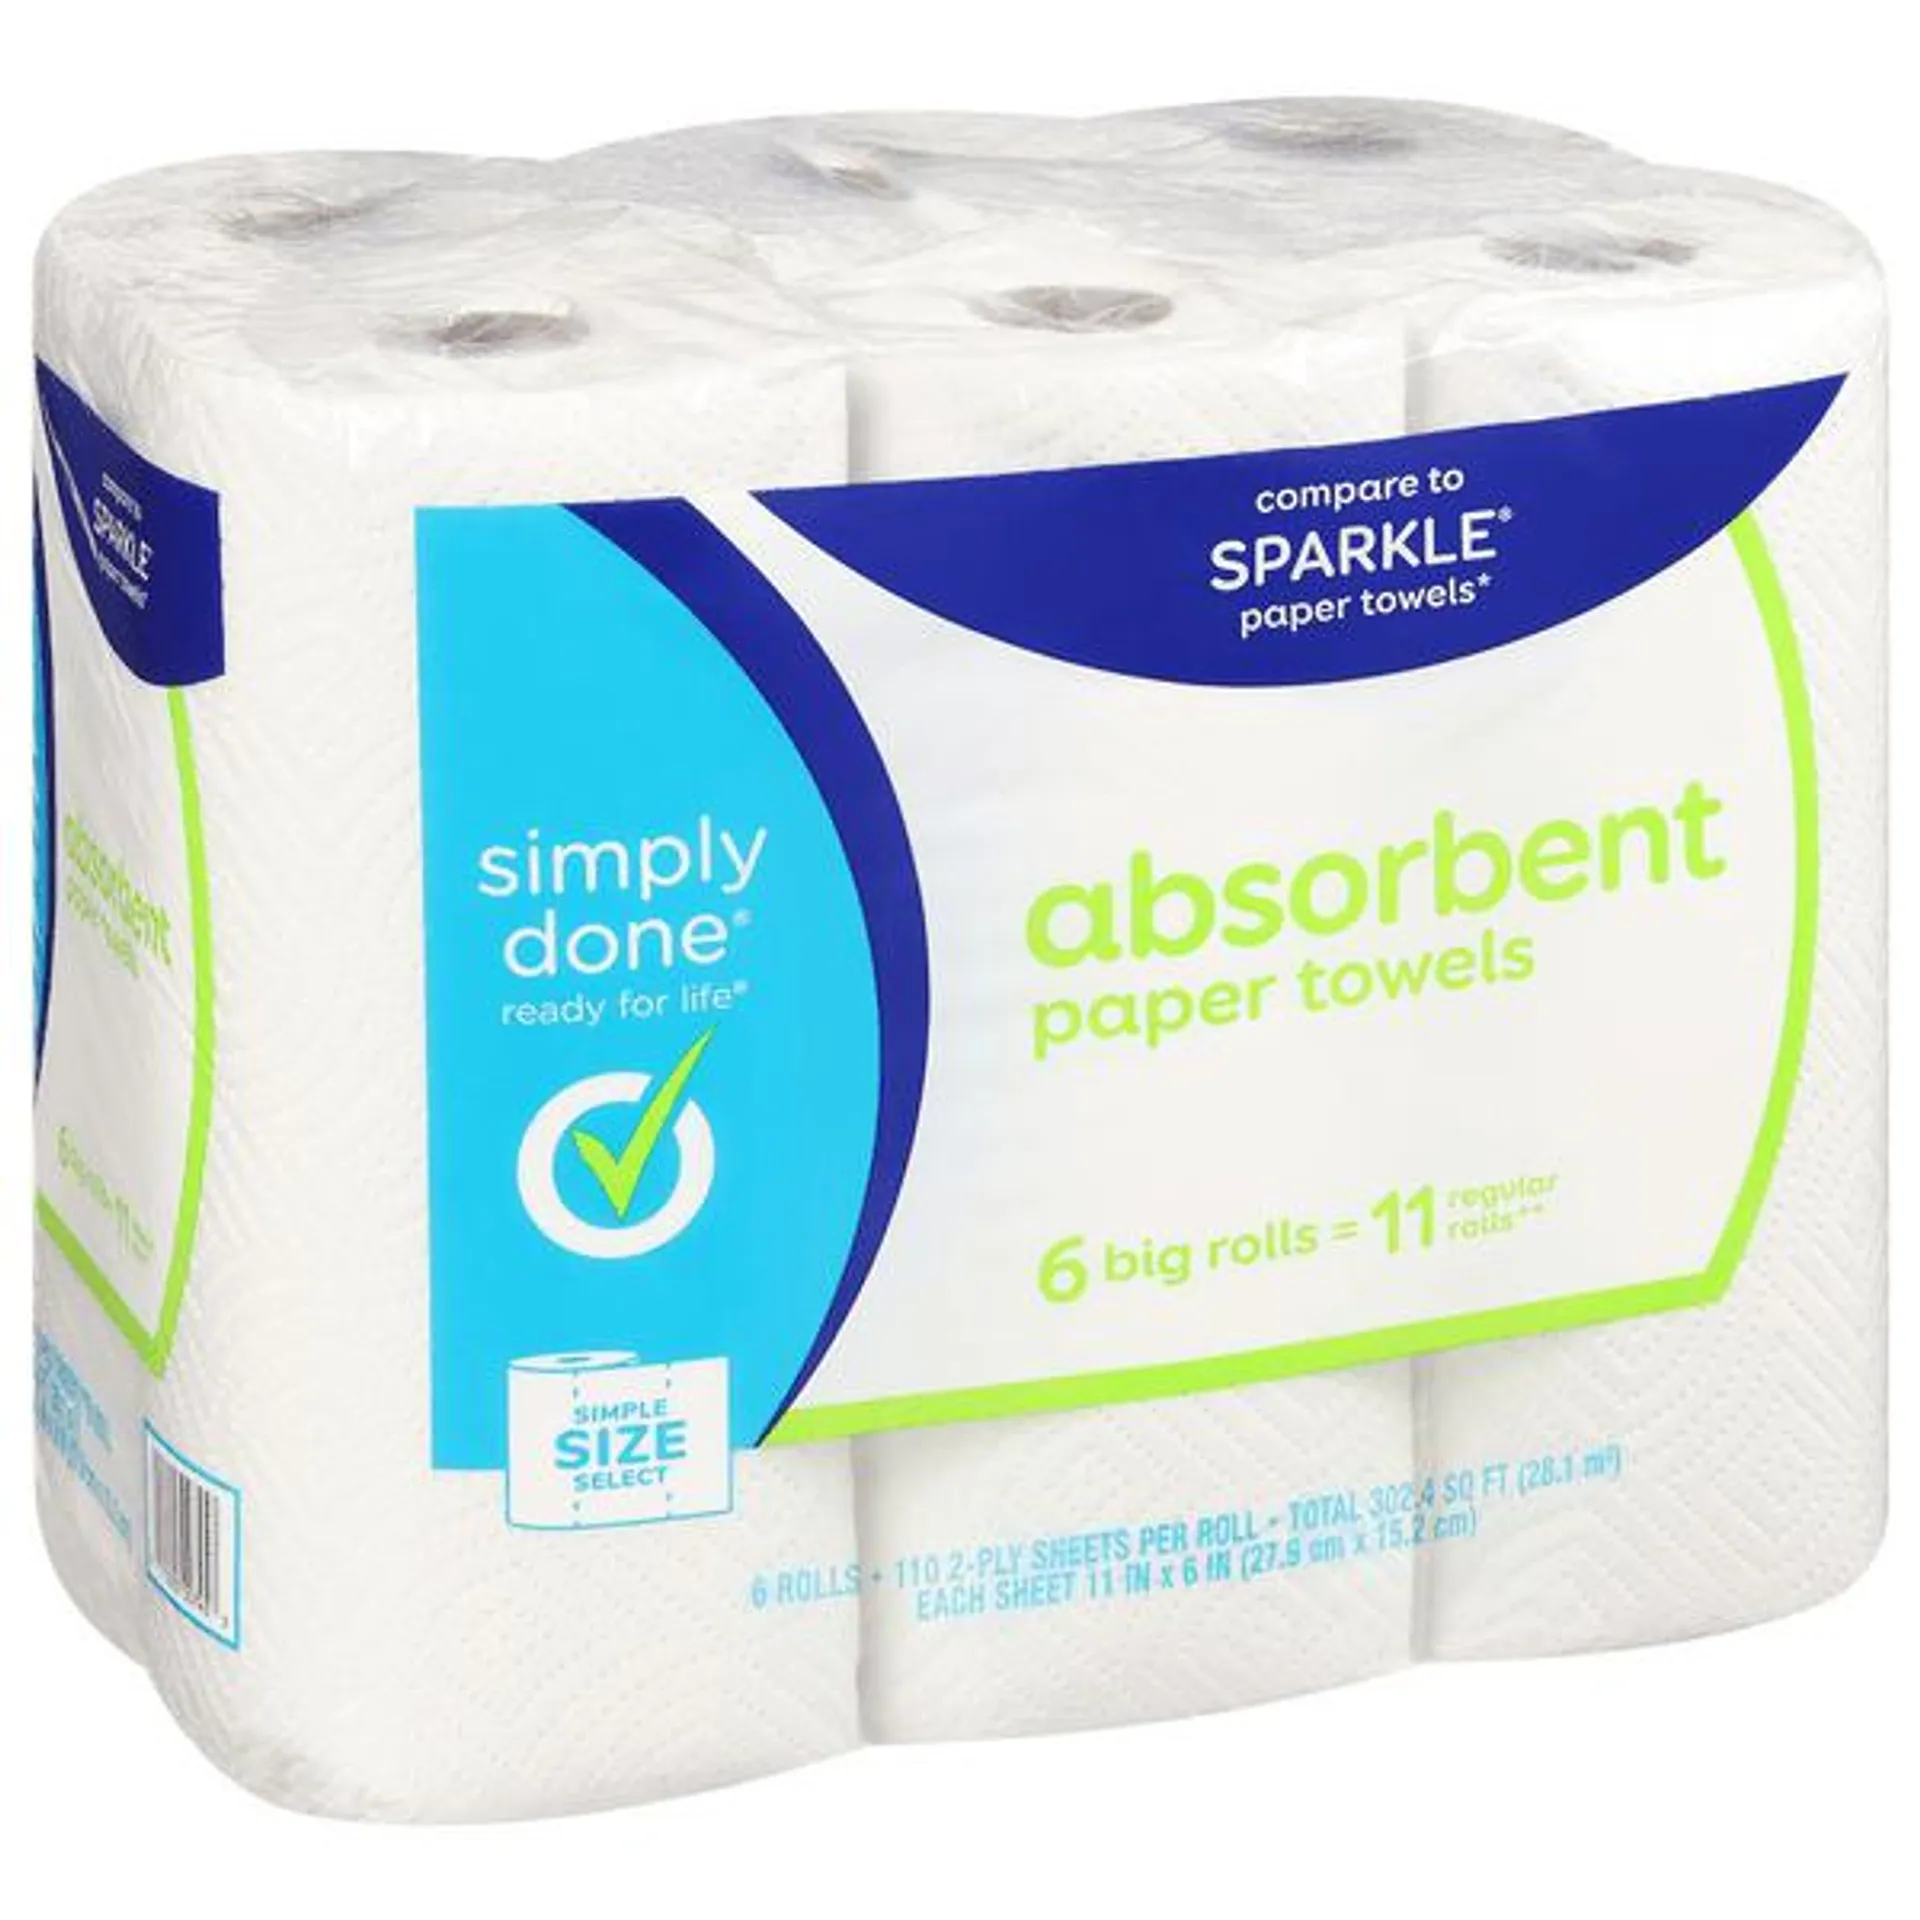 Simply Done Paper Towels, Absorbent, Simple Size Select, Big Rolls, 2-Ply